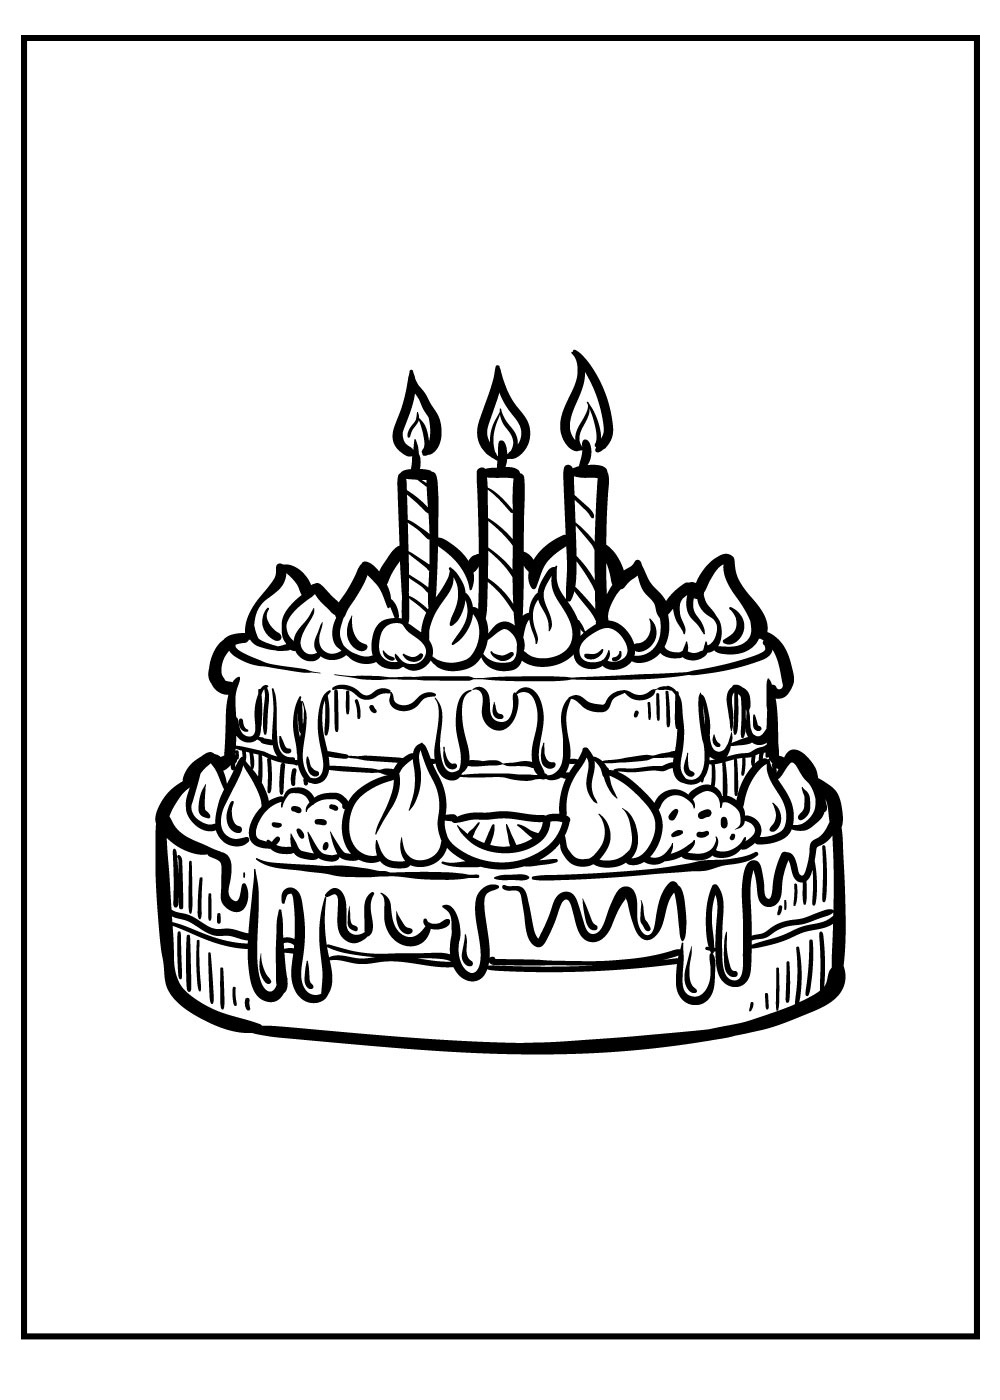 Free Birthday Cake With Fruits Coloring Page